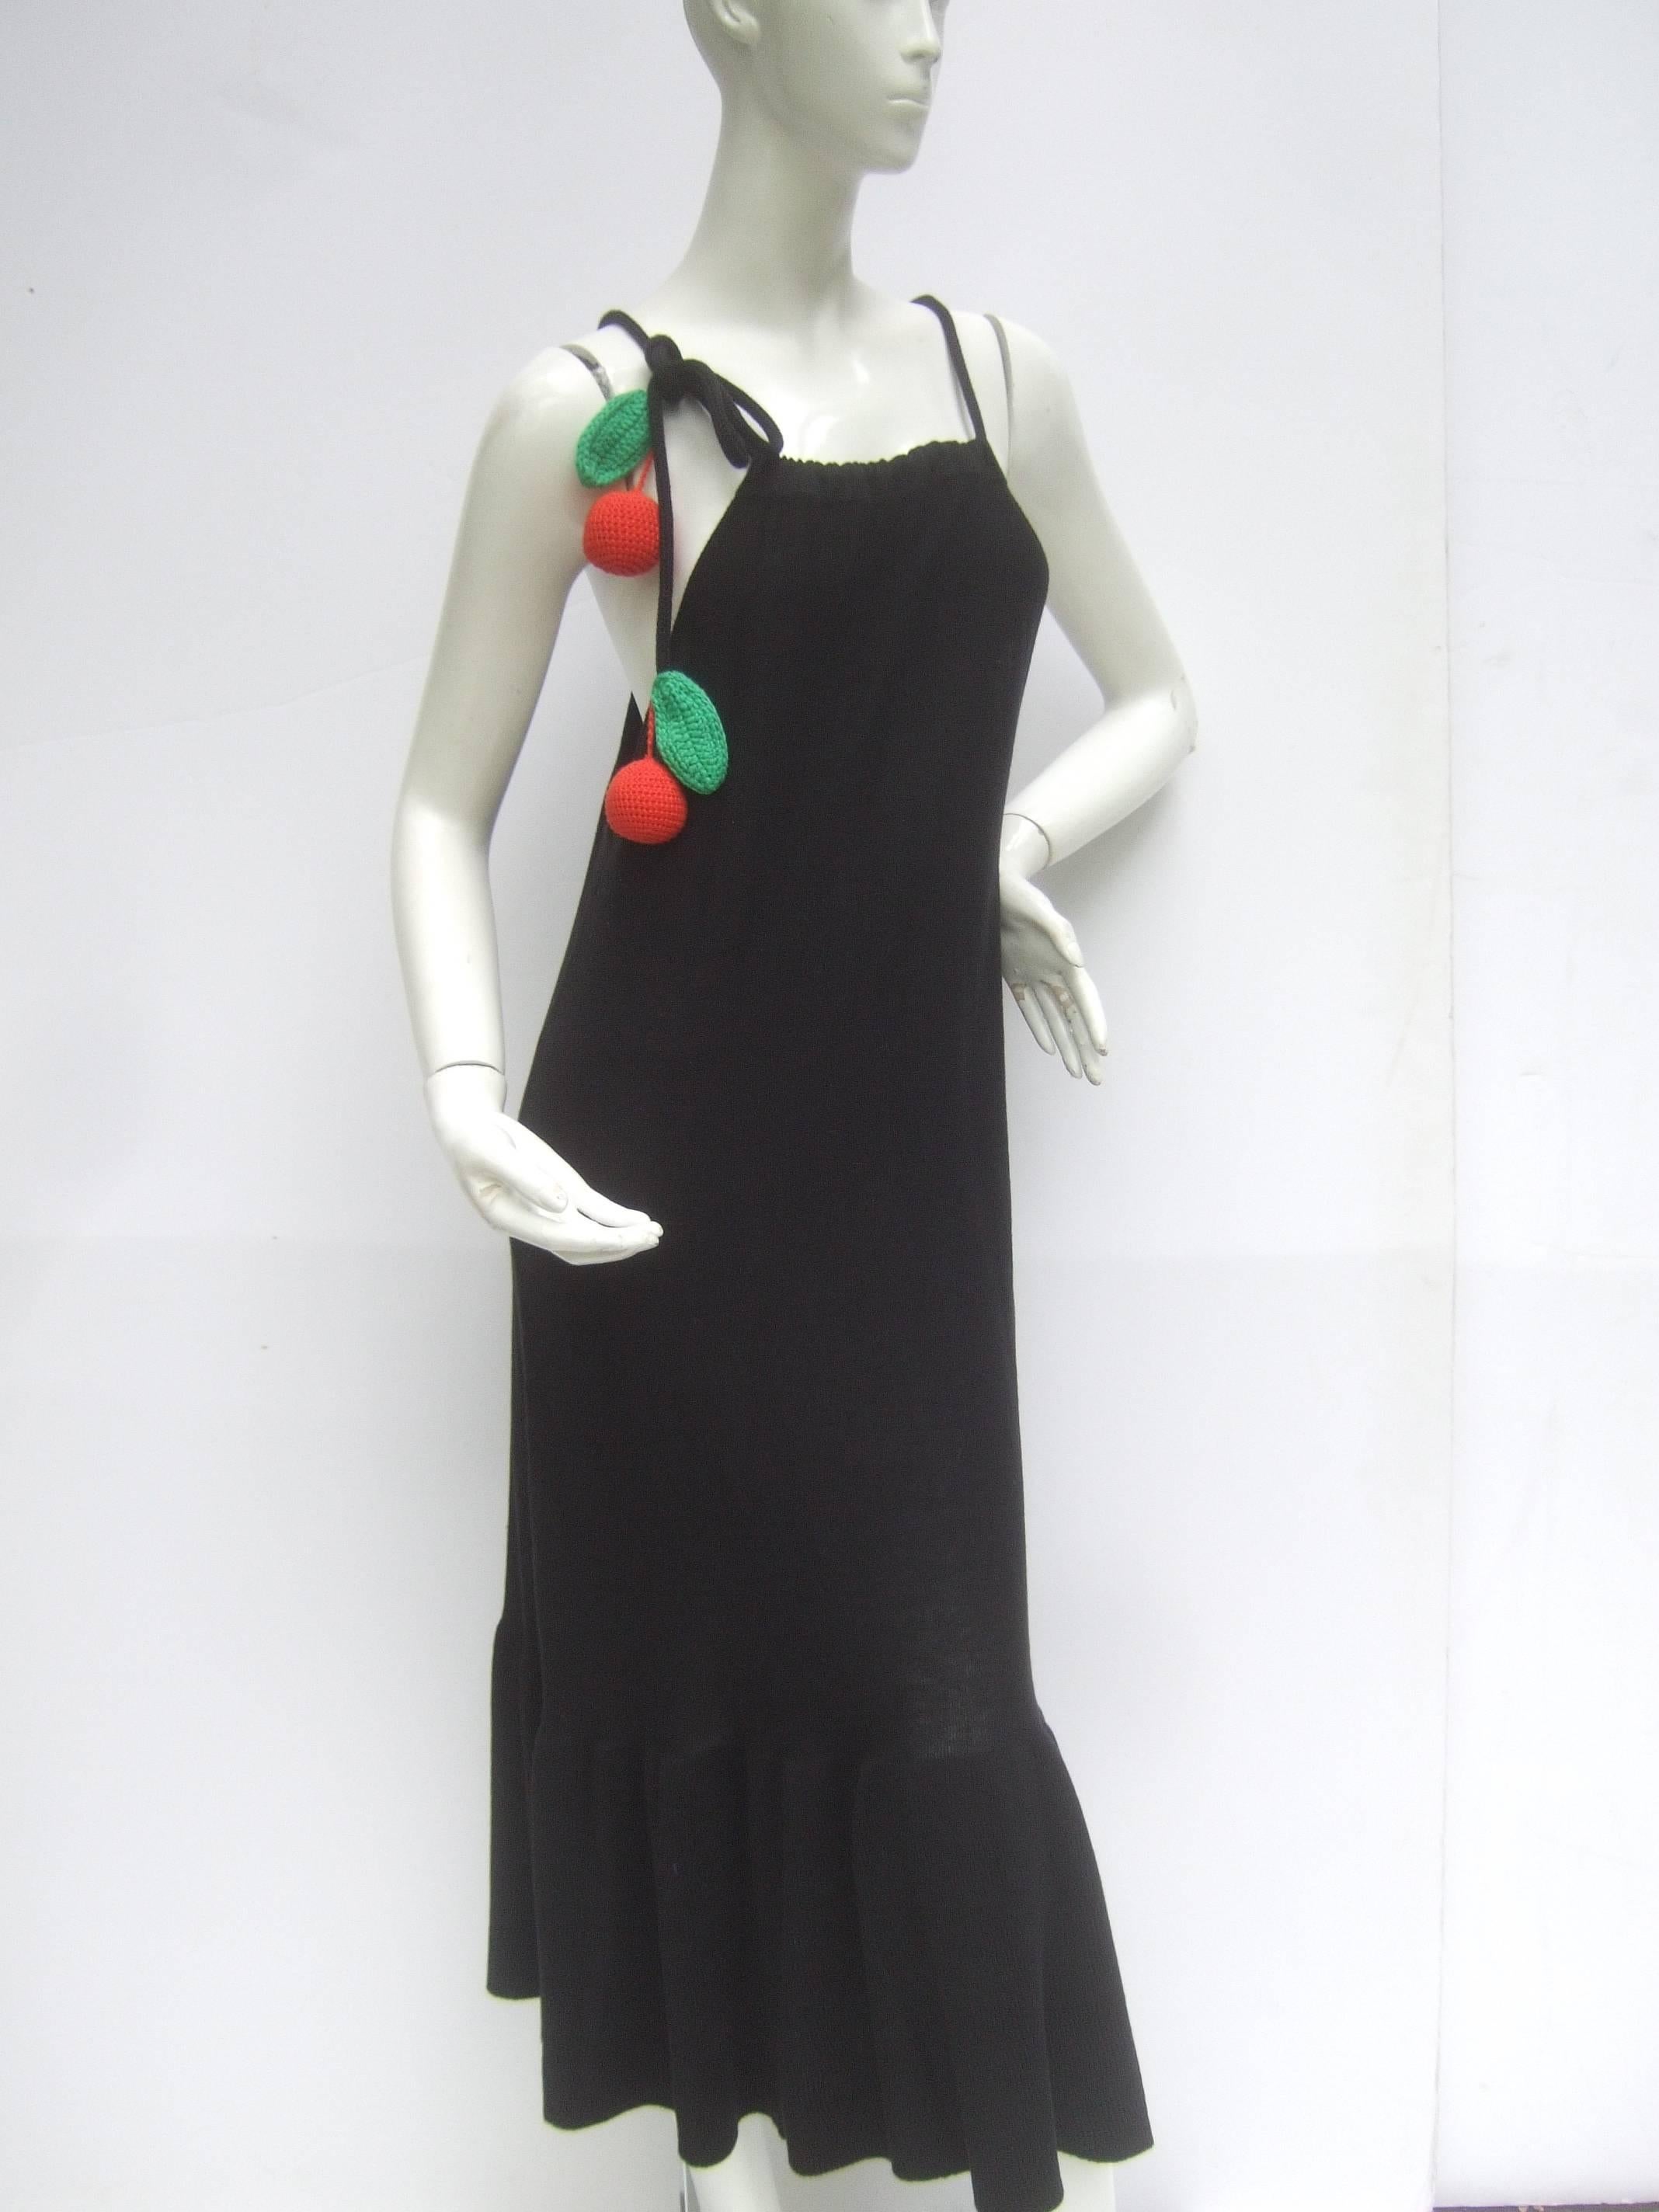 Sonia Rykiel Unique black cotton knit long dress
The cotton knit column style dress is designed
with a pair of whimsical large red knit cherries 
and matching green knit leaves

The dangling knit fruit is suspended from
one of the cotton rope